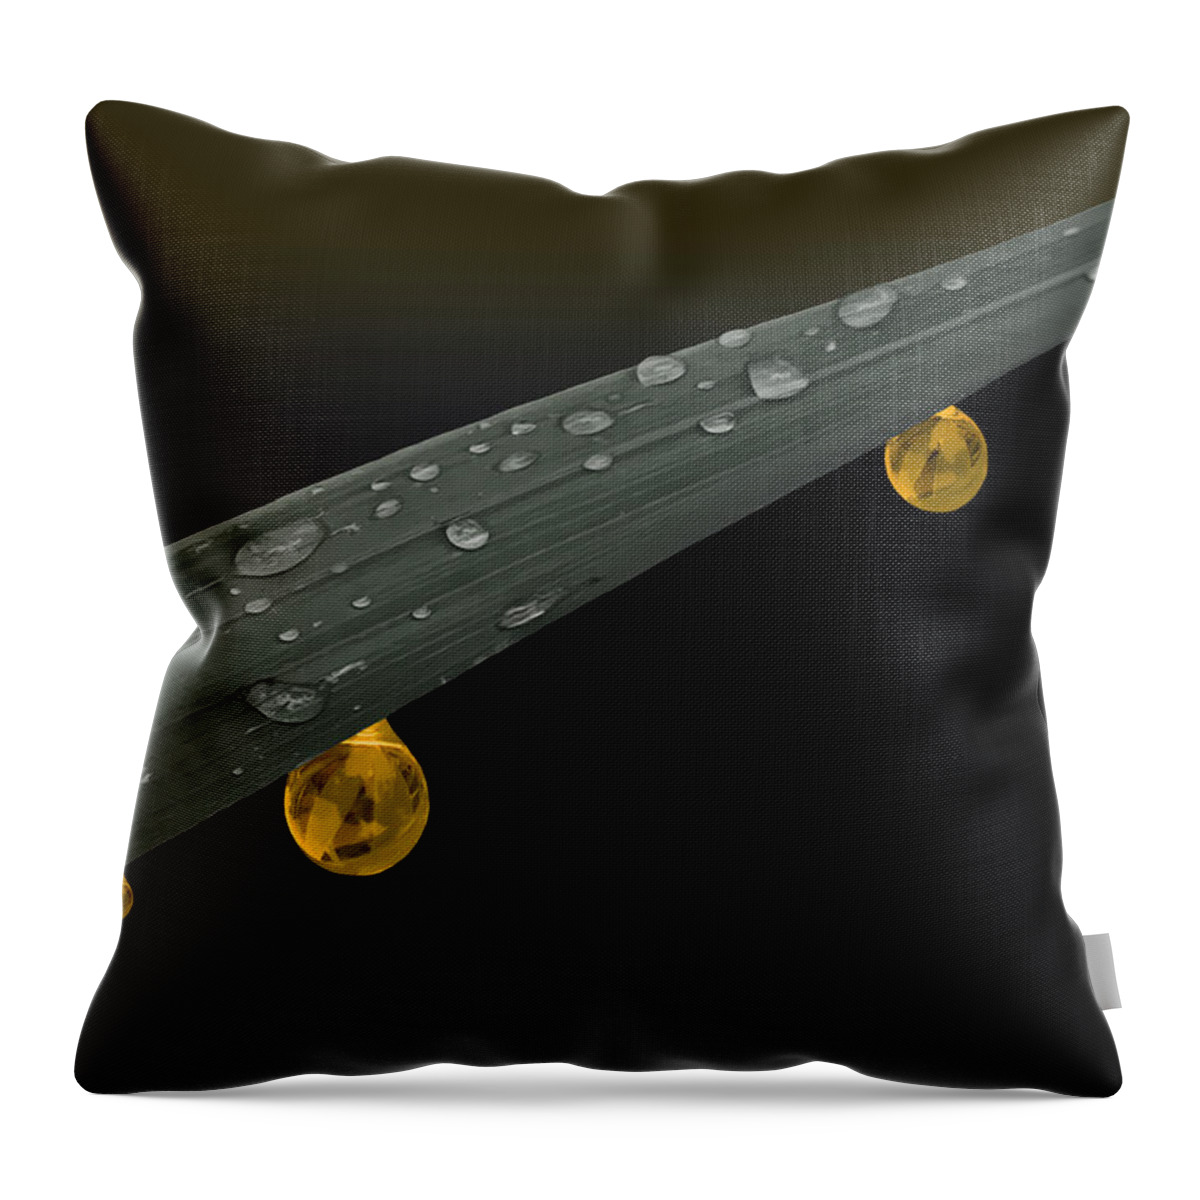 Grass Throw Pillow featuring the photograph Golden Dew by Angela Stanton